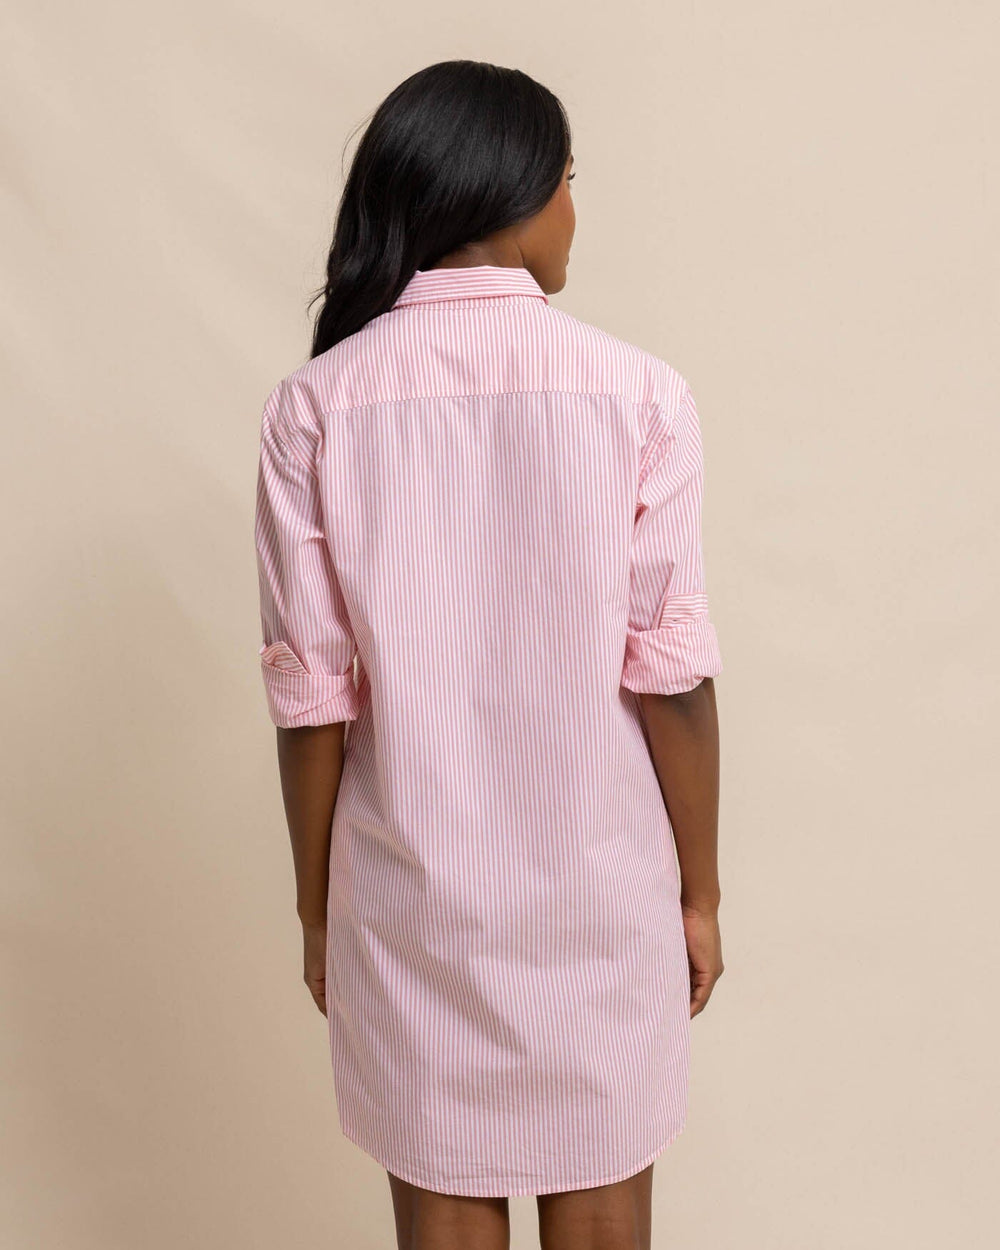 The back view of the Southern Tide Cam Stripe Poplin Dress by Southern Tide - Conch Shell